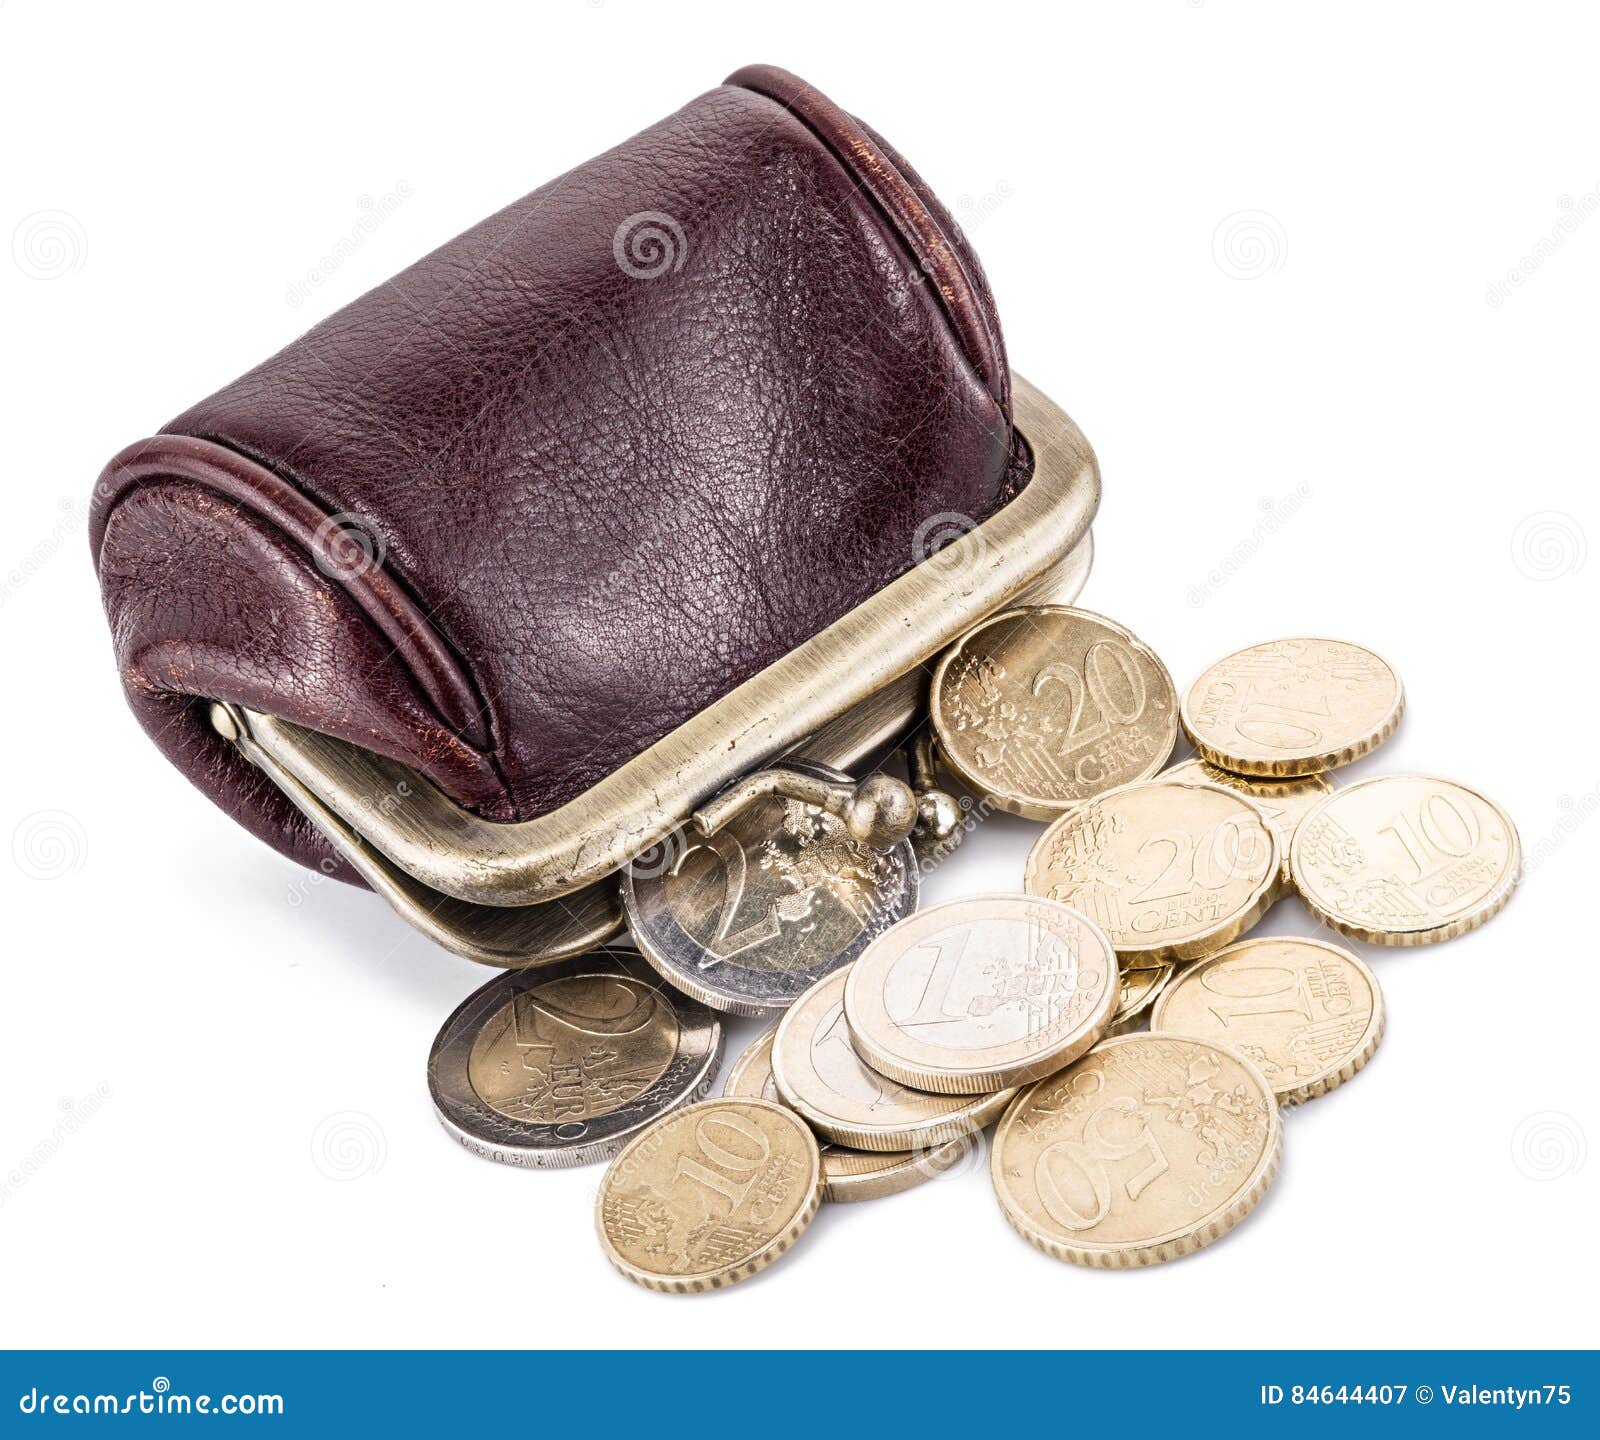 Small Leather Purse For Coins. Stock Image - Image of antique, purse: 84644407